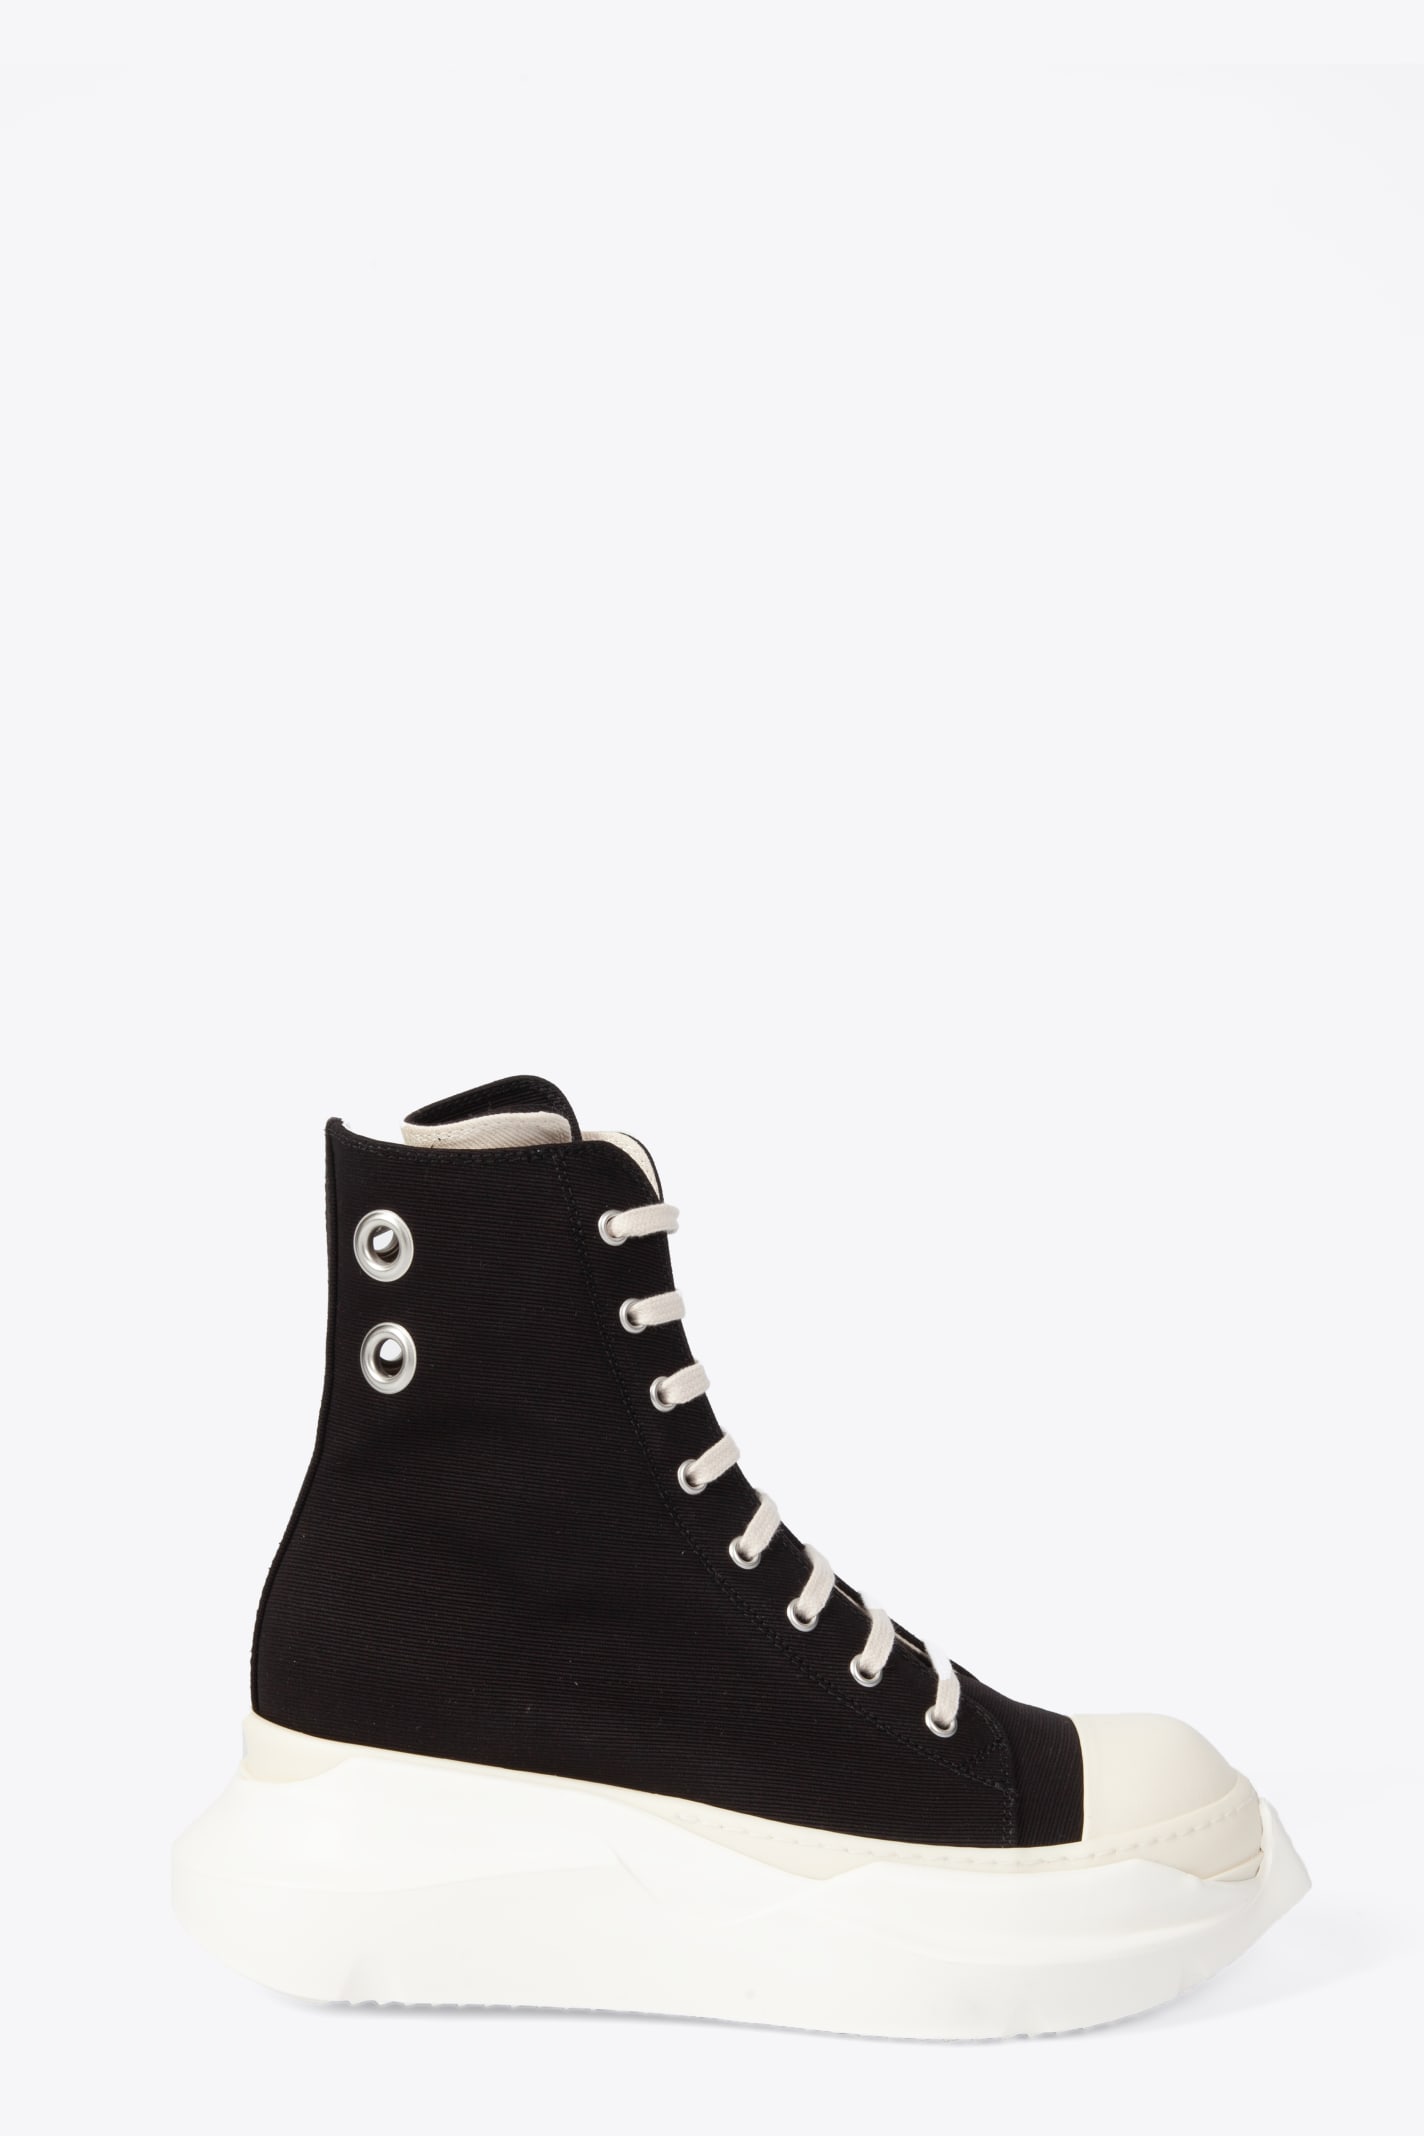 Abstract Sneak Black/milk/milk Black cotton lace-up high sneaker with chunky sole - Abstract Hi Sneaks